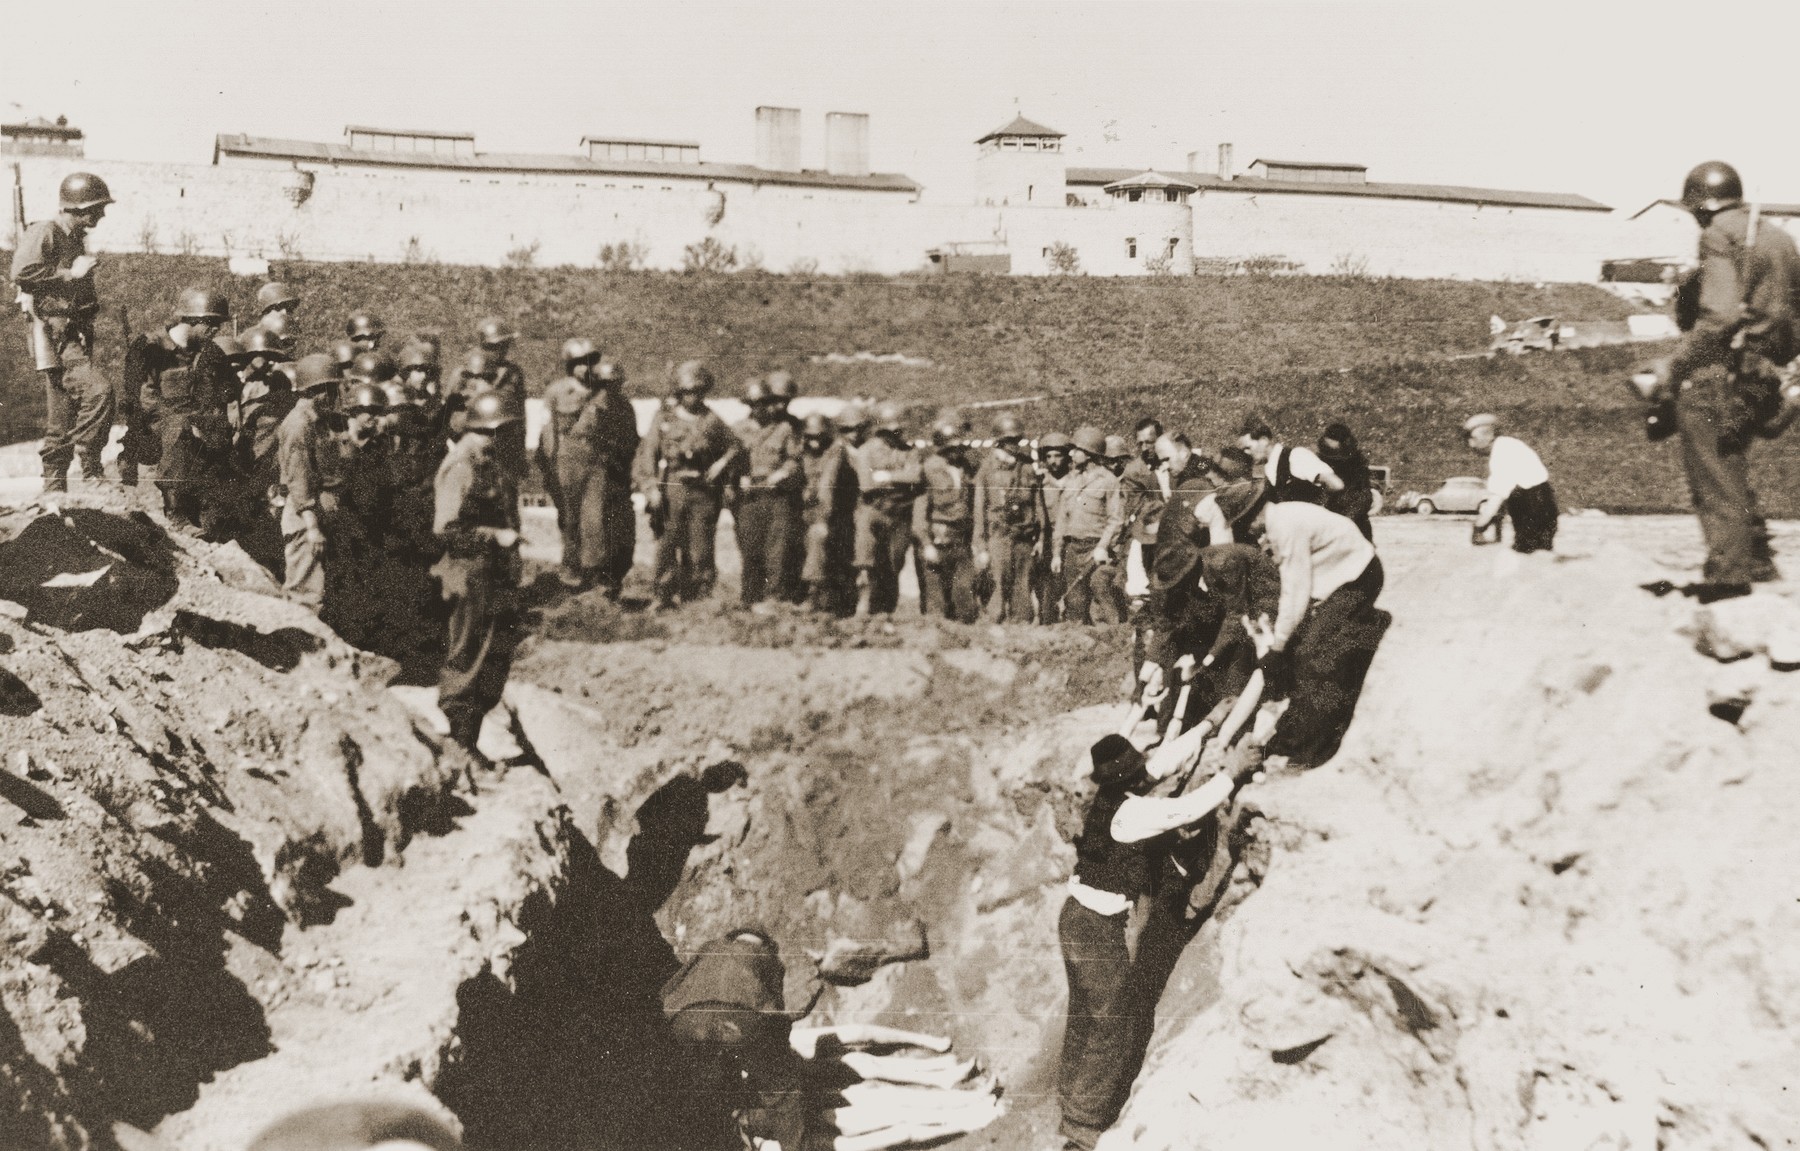 American soldiers watch as Austrian civilians lay the bodies of Mauthausen victims in a mass grave dug in the former SS soccer field.

Ray Buch stands at the right holding a camera.  Officers Chas Thurston of Pennsylvania and Harry Brown of Texas are among the American soldiers standing guard.